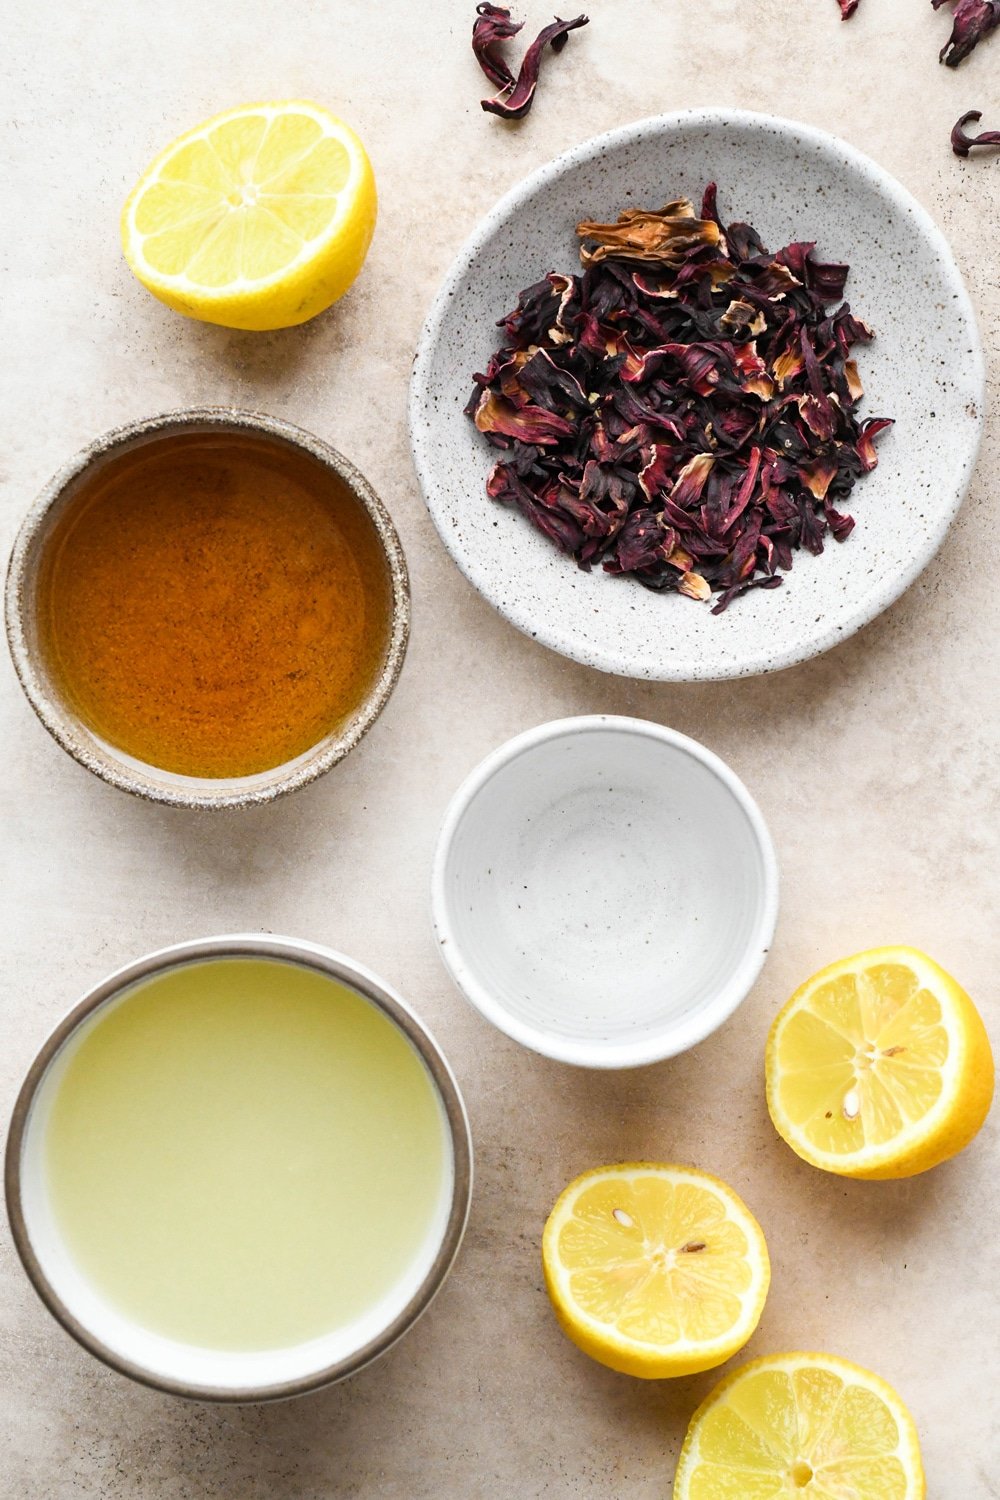 Ingredients to make hibiscus lemonade in various ceramics on a creamy colored background.